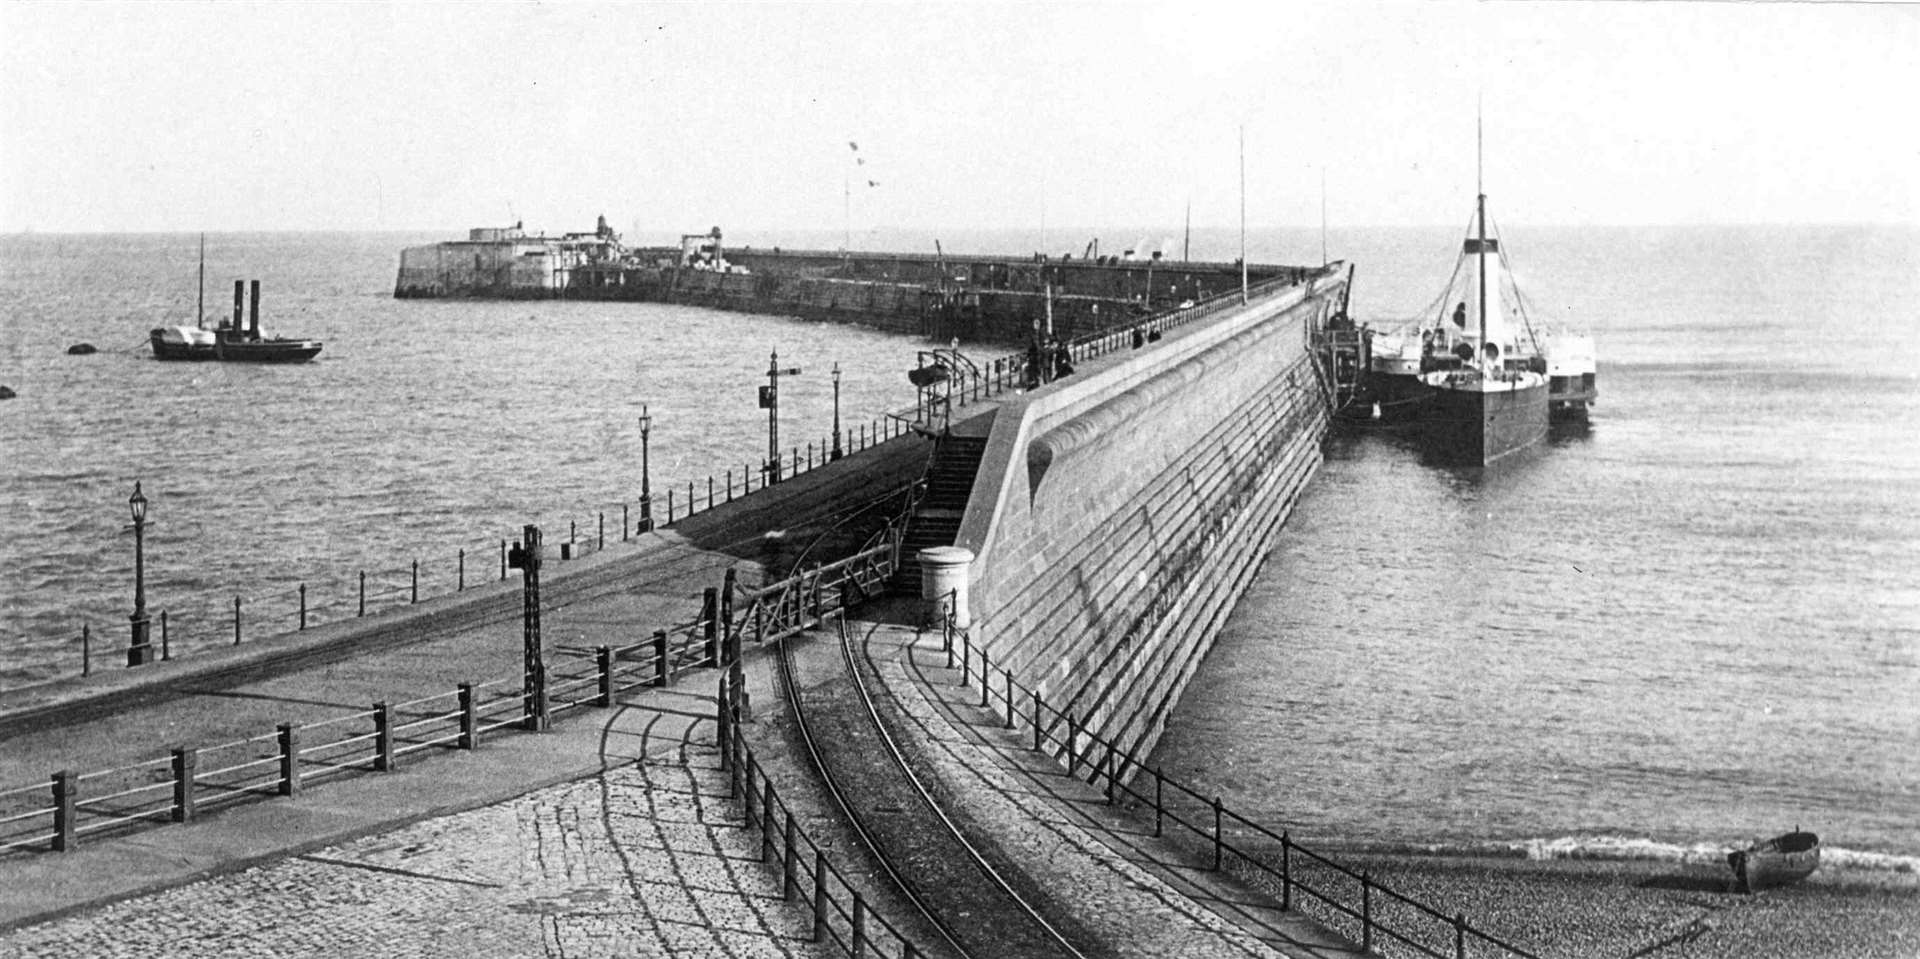 The Admiralty Pier in 1895 with a paddle boat alongside before a planned extension